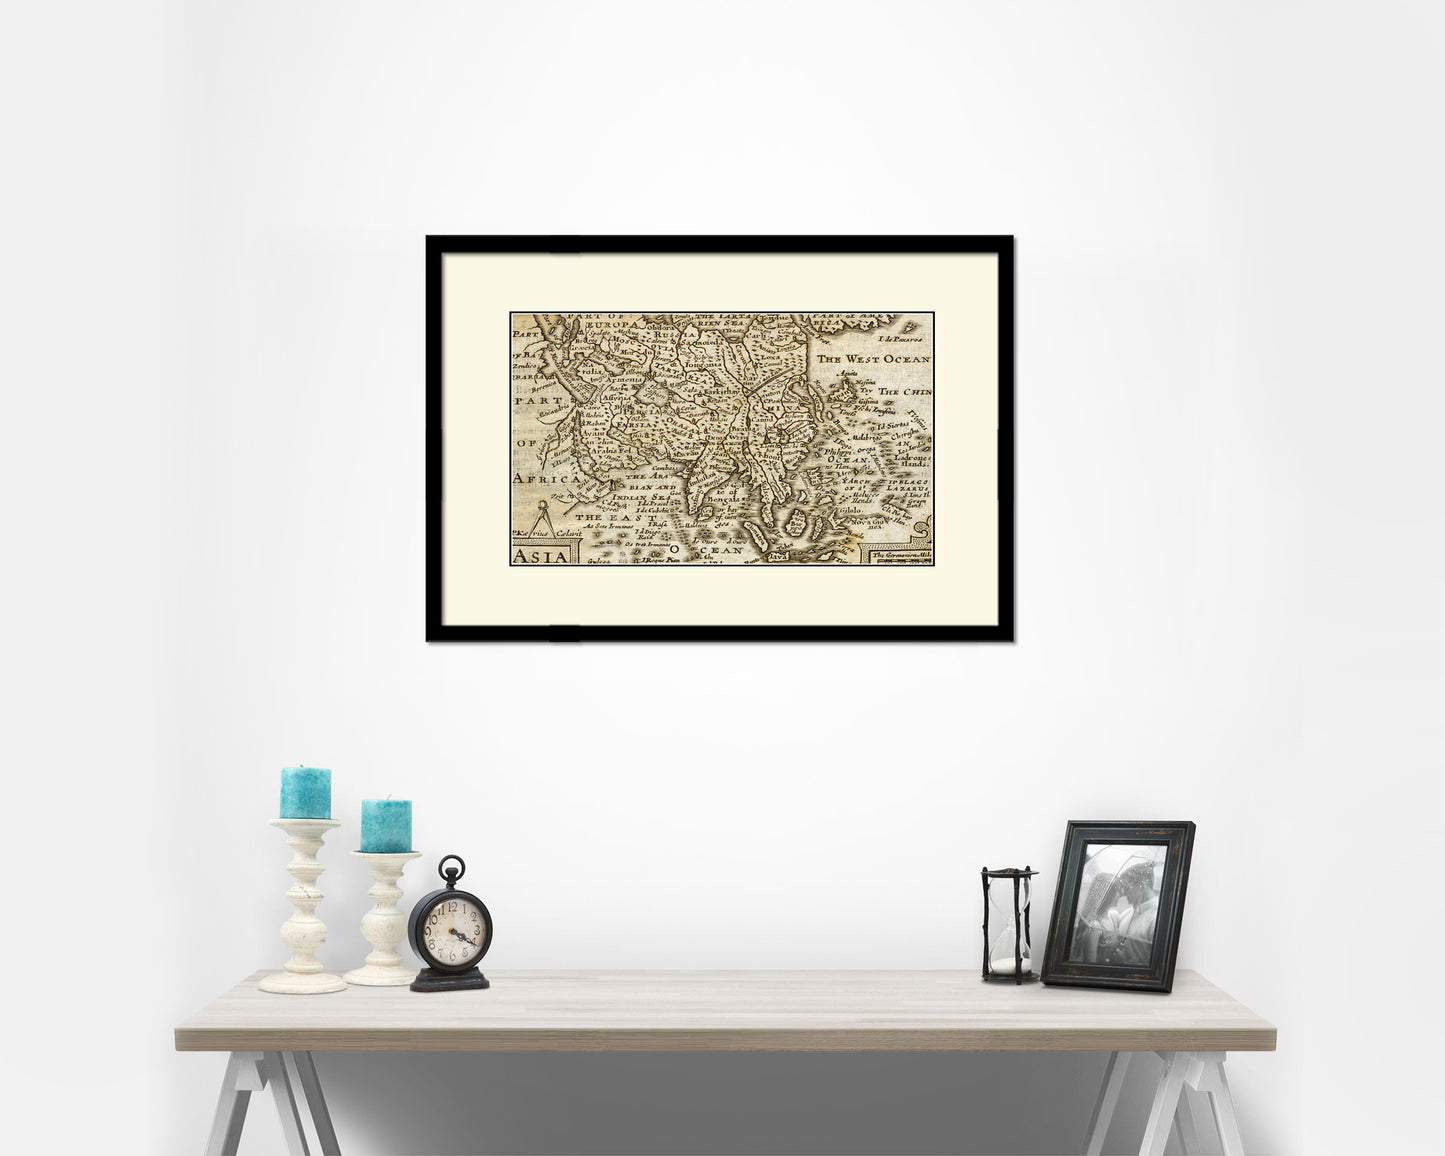 Asia John Speed 1675 Old Map Framed Print Art Wall Decor Gifts